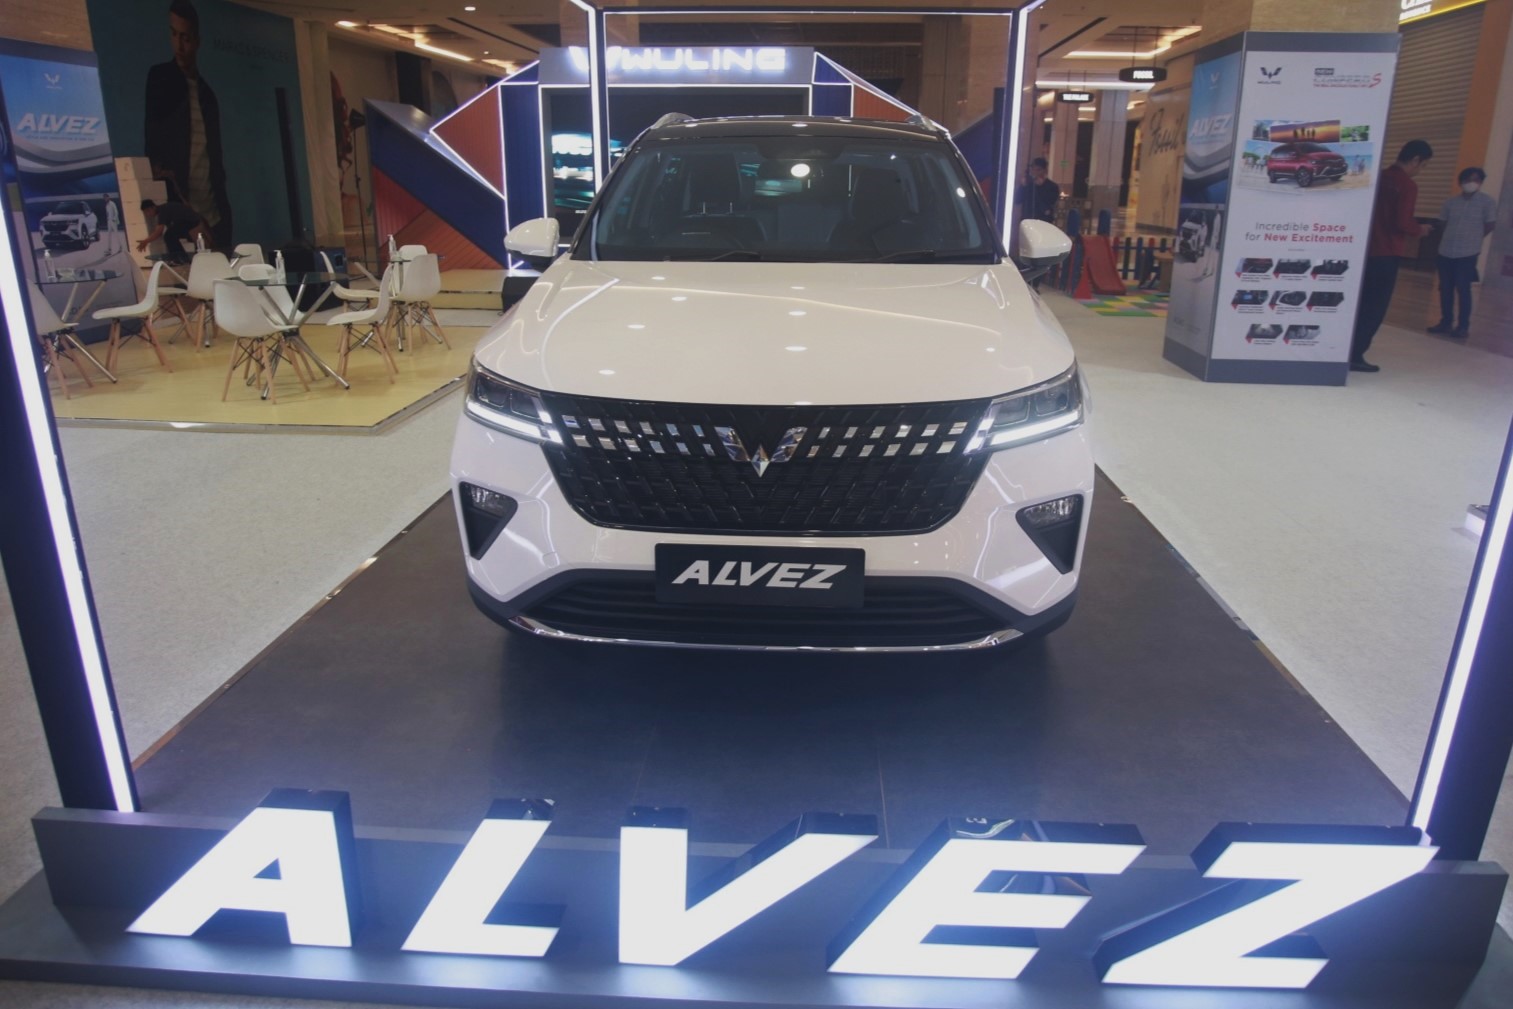 Image Wuling Officially Launches Alvez, ‘Style and Innovation in One SUV’ in Yogyakarta